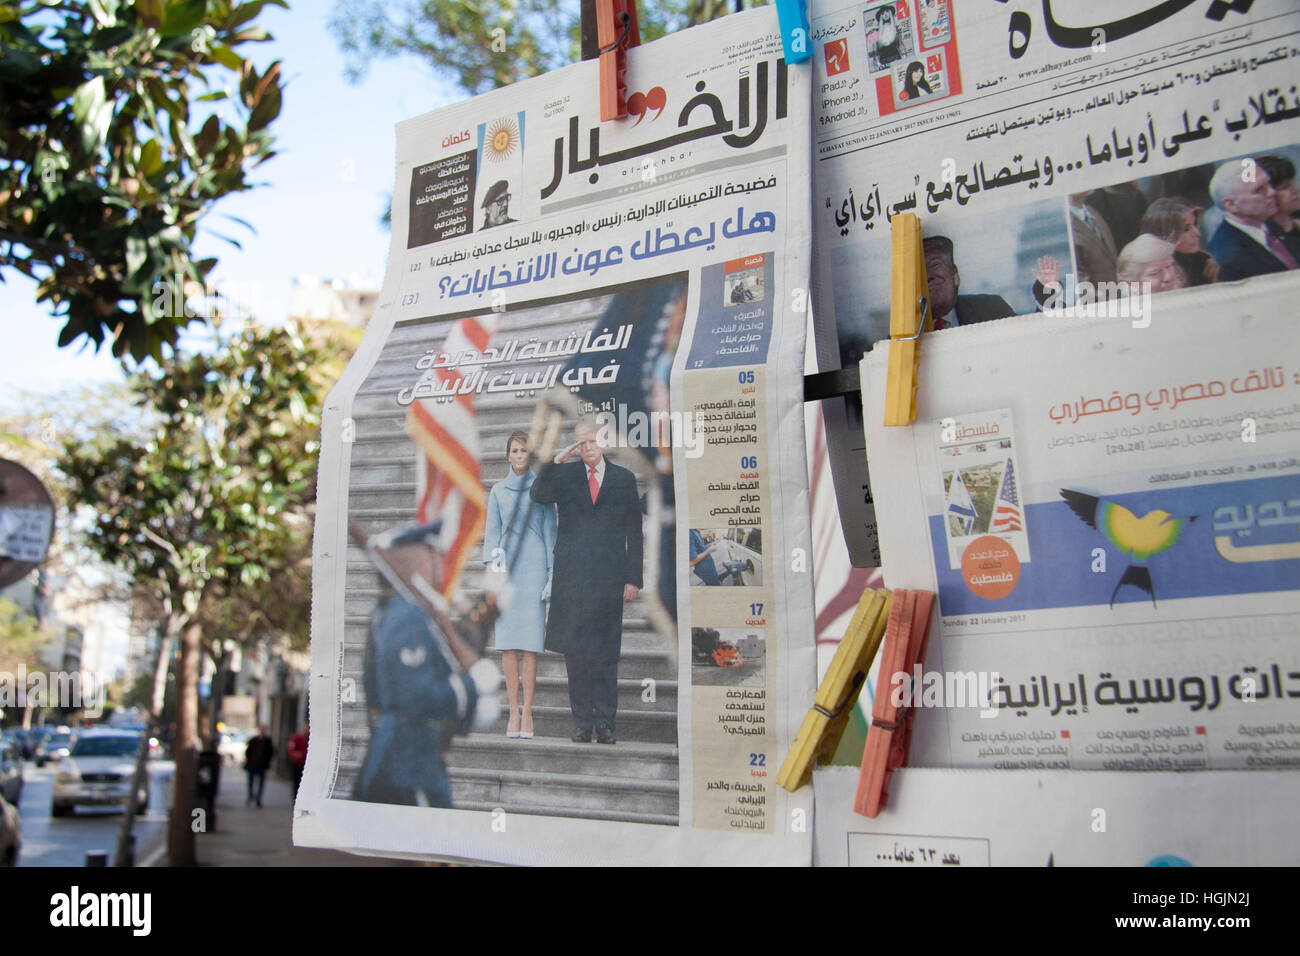 Beirut, Lebanon. 22nd January, 2017. Beirut Lebanon. 22nd January 2017. A Newspaper stand in Beirut displays Arabic newspapers featuring the Inauguration of President Donald Trump Credit: amer ghazzal/Alamy Live News Stock Photo